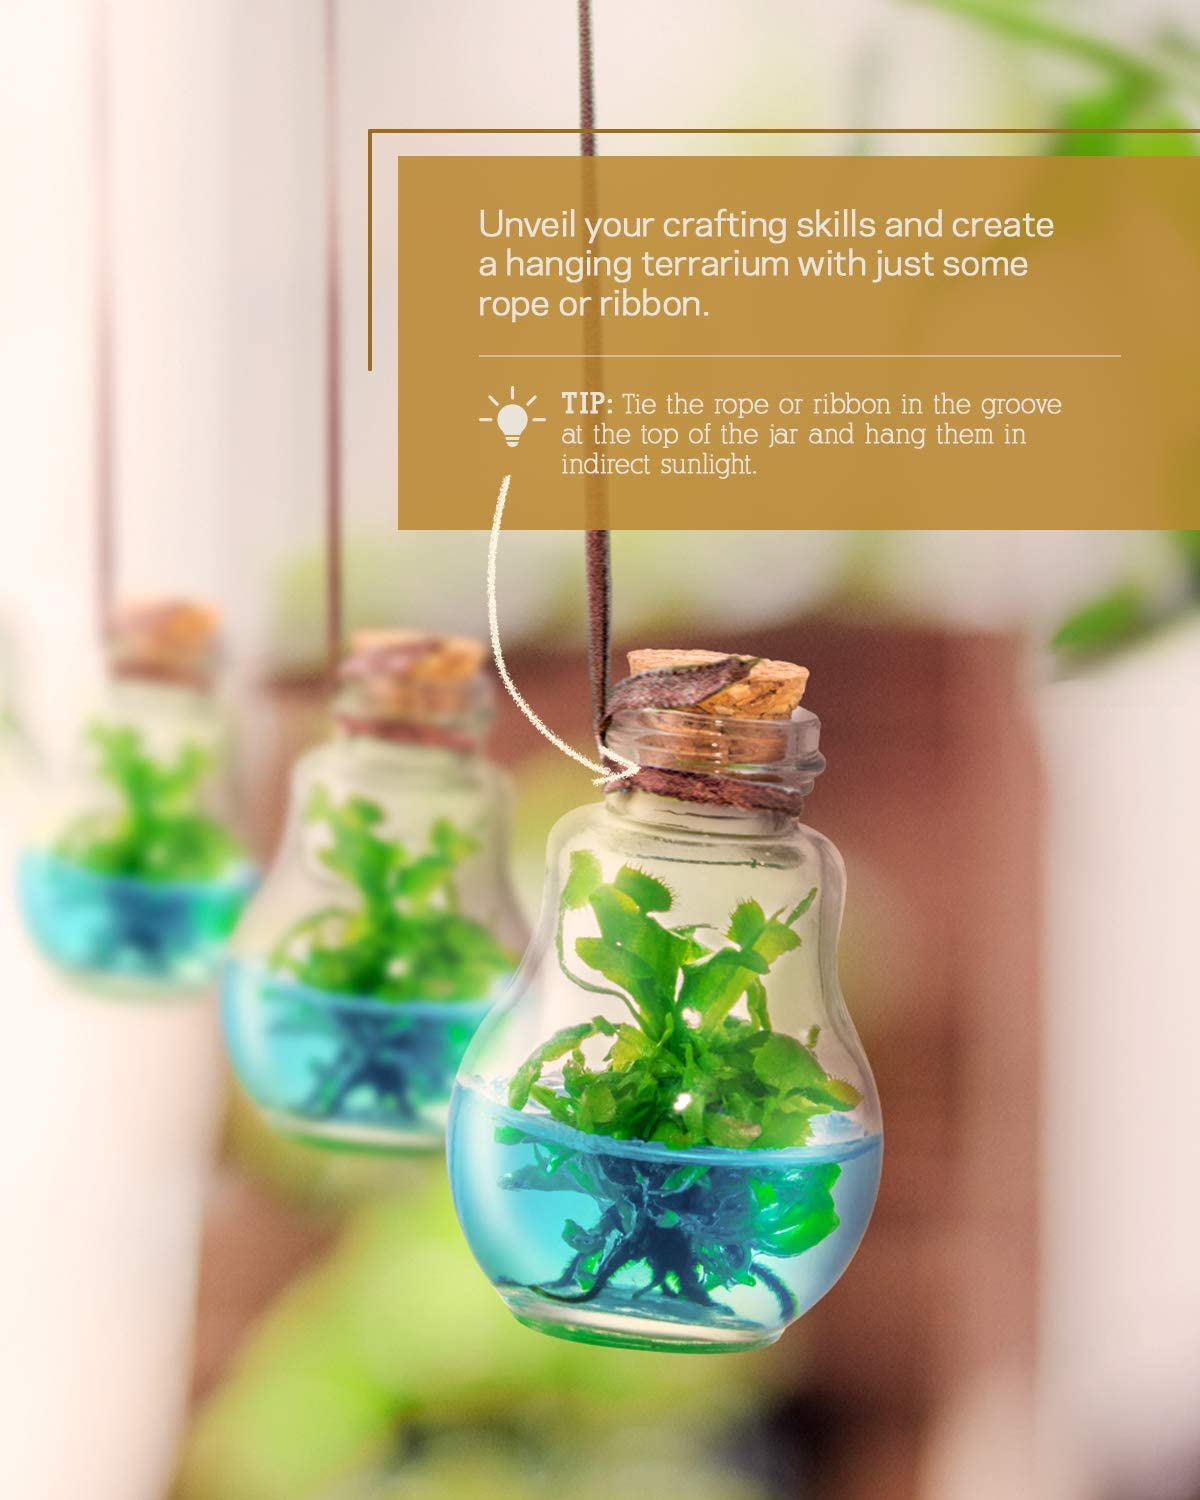 A suggestion on how to display the grow your own Venus flytrap terrarium